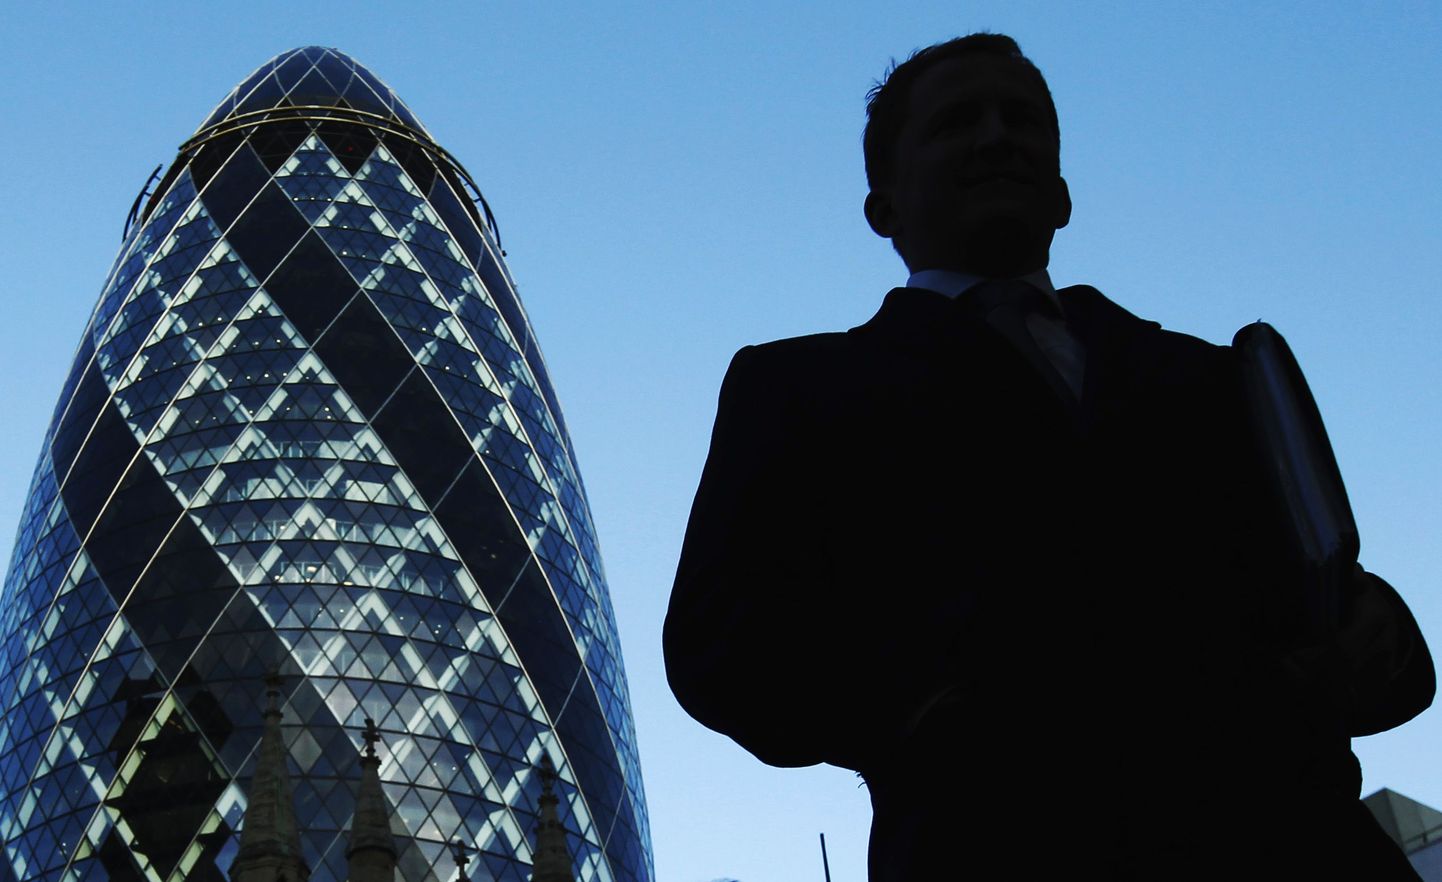 A City worker walks near the Swiss Re building known as the Gherkin in the City of London December 9, 2011.  Europe secured an historic agreement to draft a new treaty for deeper economic integration in the euro zone on Friday, but Britain, the region's third largest economy, refused to join the other 26 countries in a fiscal union and was isolated.   REUTERS/Luke MacGregor  (BRITAIN)